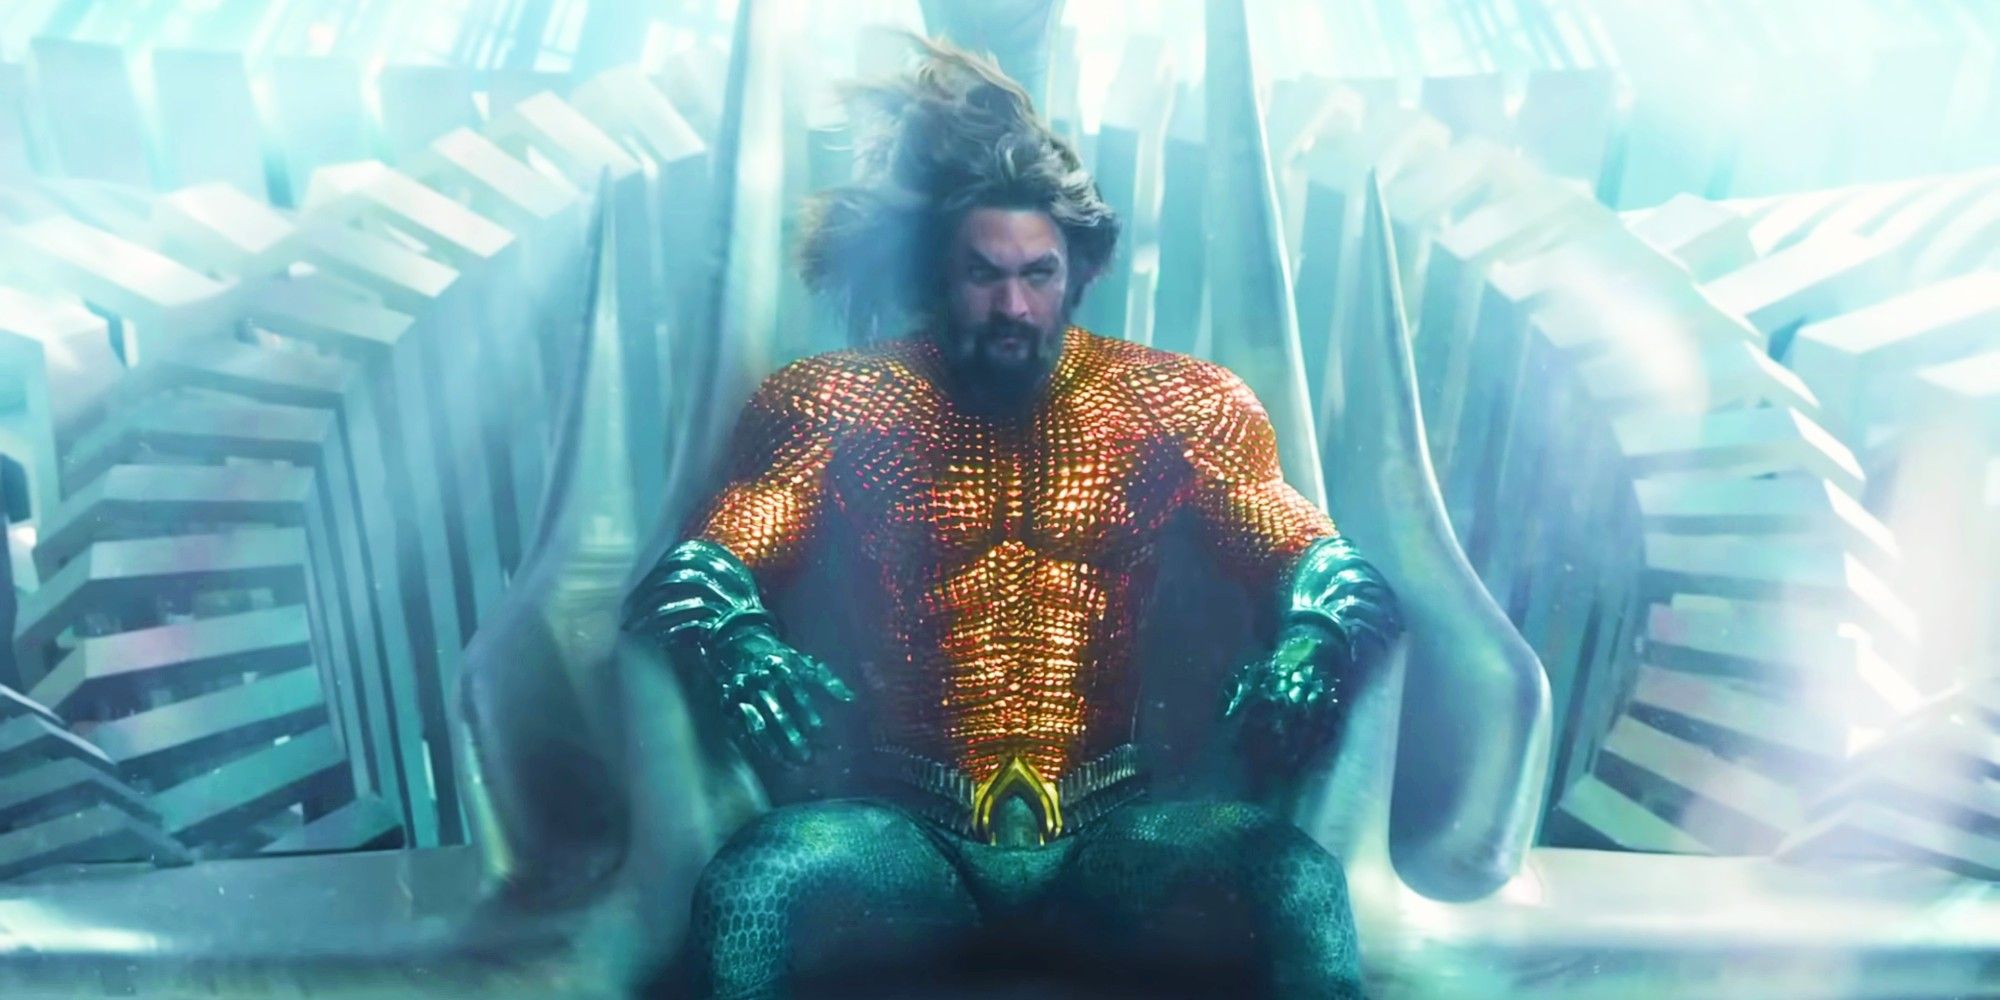 Jason Momoa as Arthur Curry sits on his throne in Atlantis wearing his orange and green suit in Aquaman and the Lost Kingdom